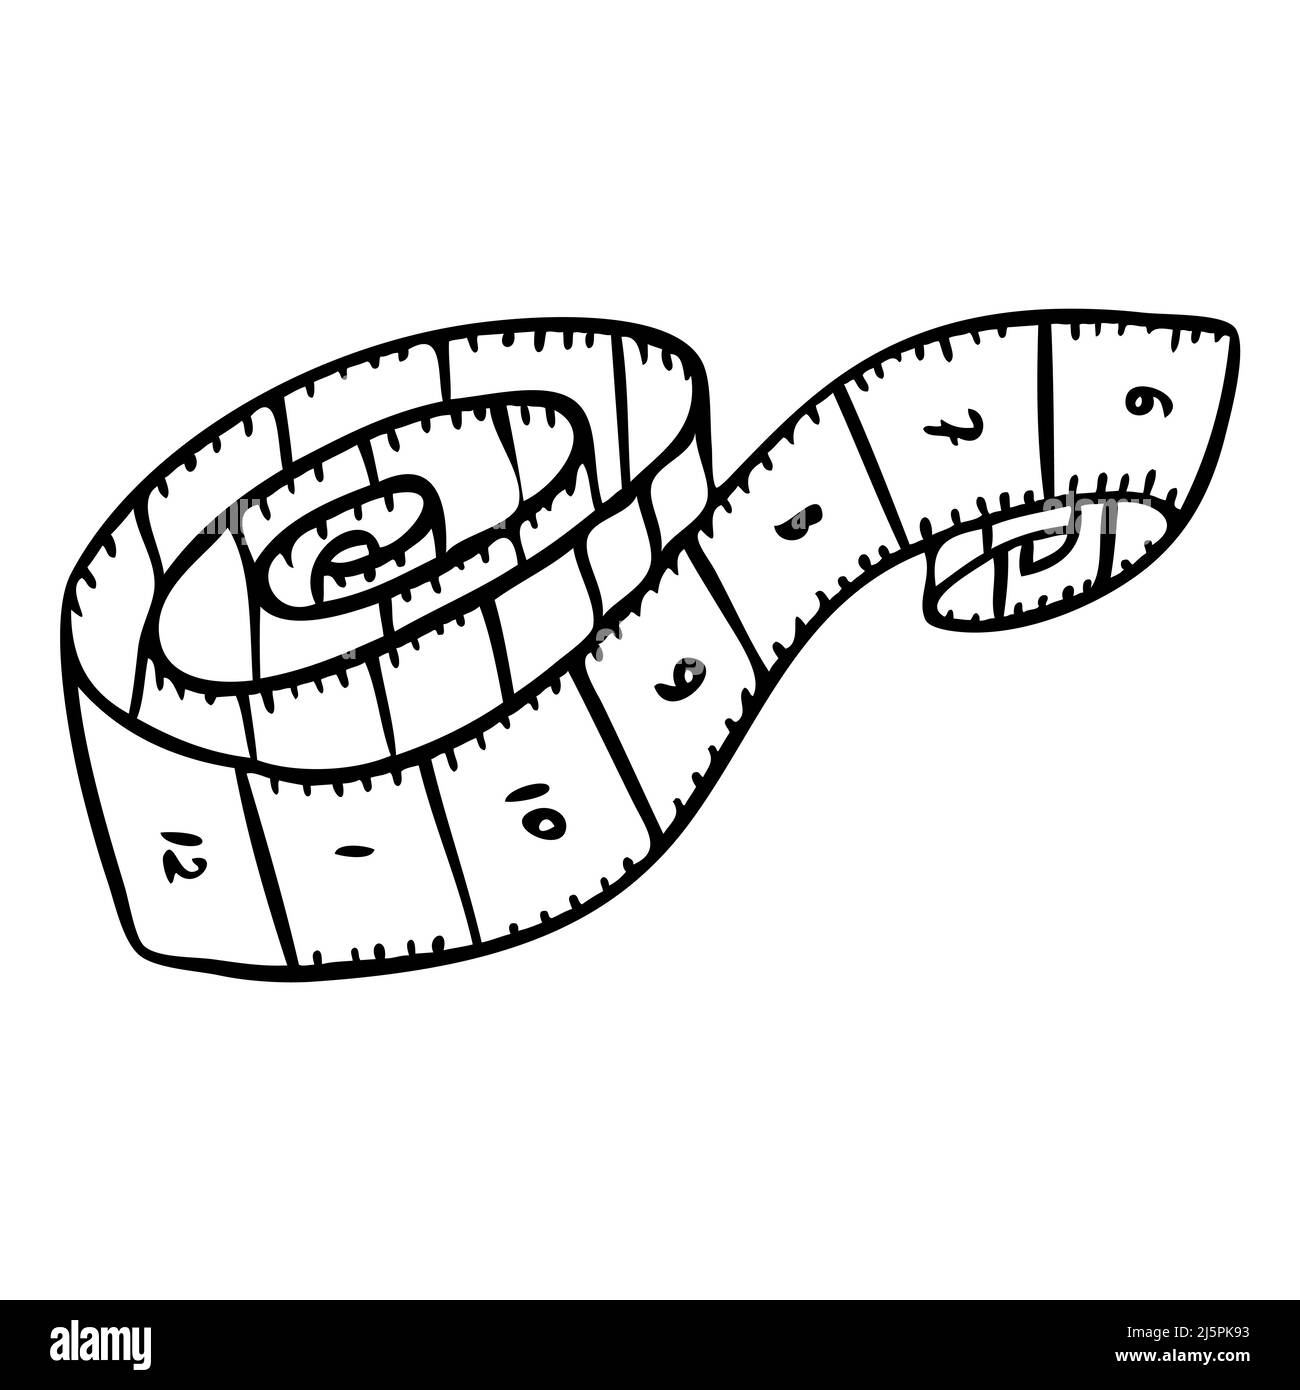 Sewing Tape. Tool for Sewing and Seamstress. Cartoon Image of a Tape Measure  for Embroidering Clothes Stock Vector - Illustration of white, symbol:  229703623